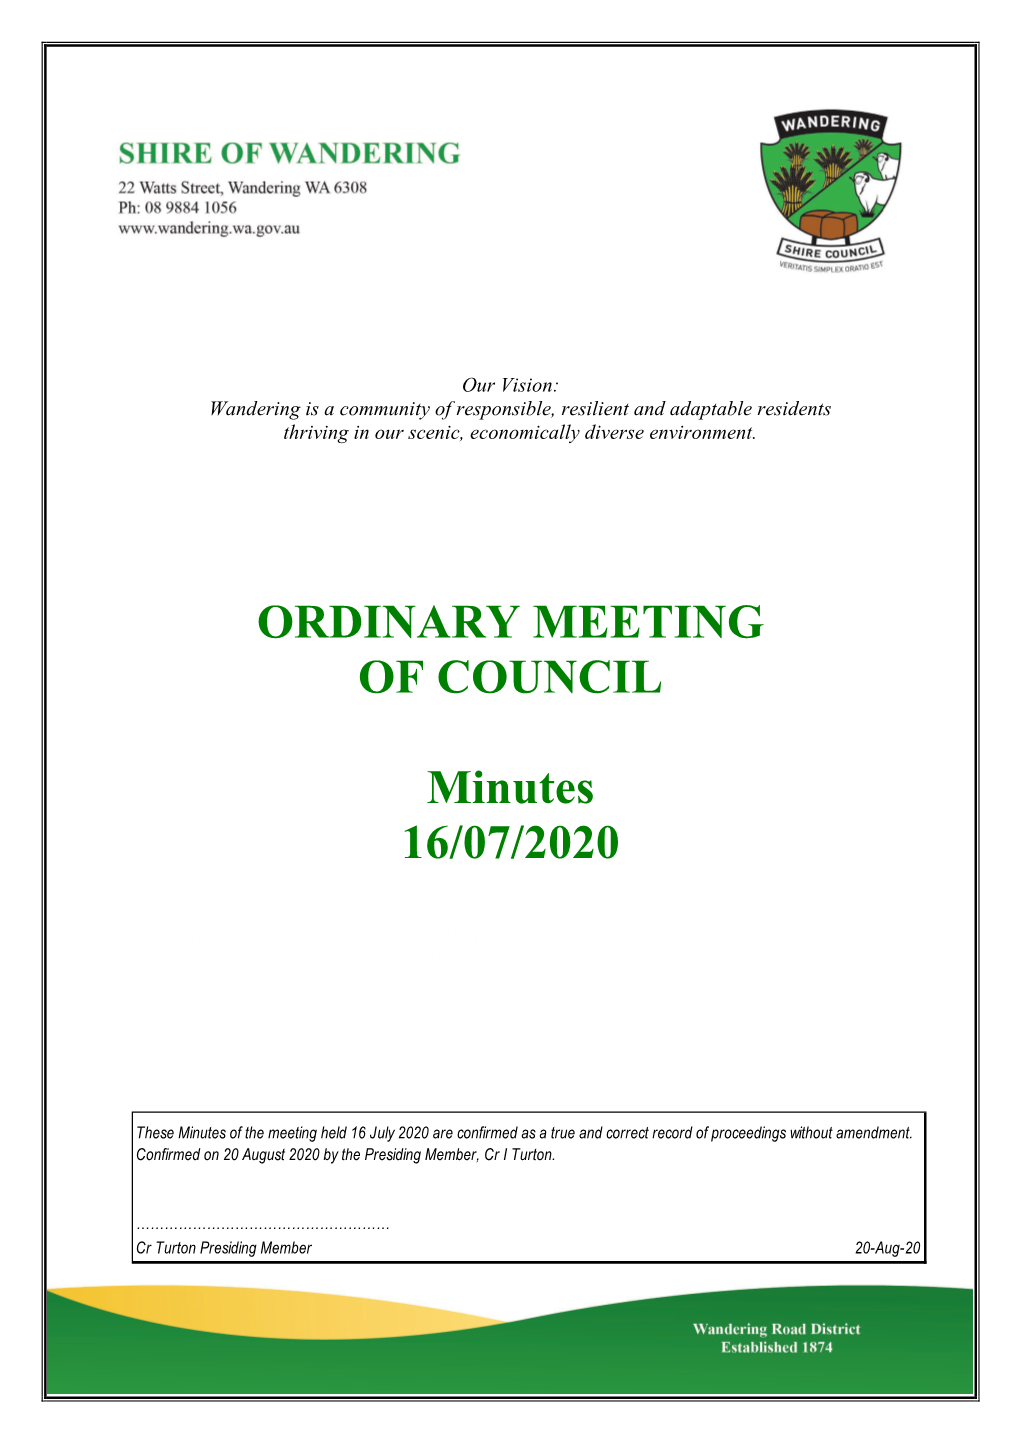 ORDINARY MEETING of COUNCIL Minutes 16/07/2020